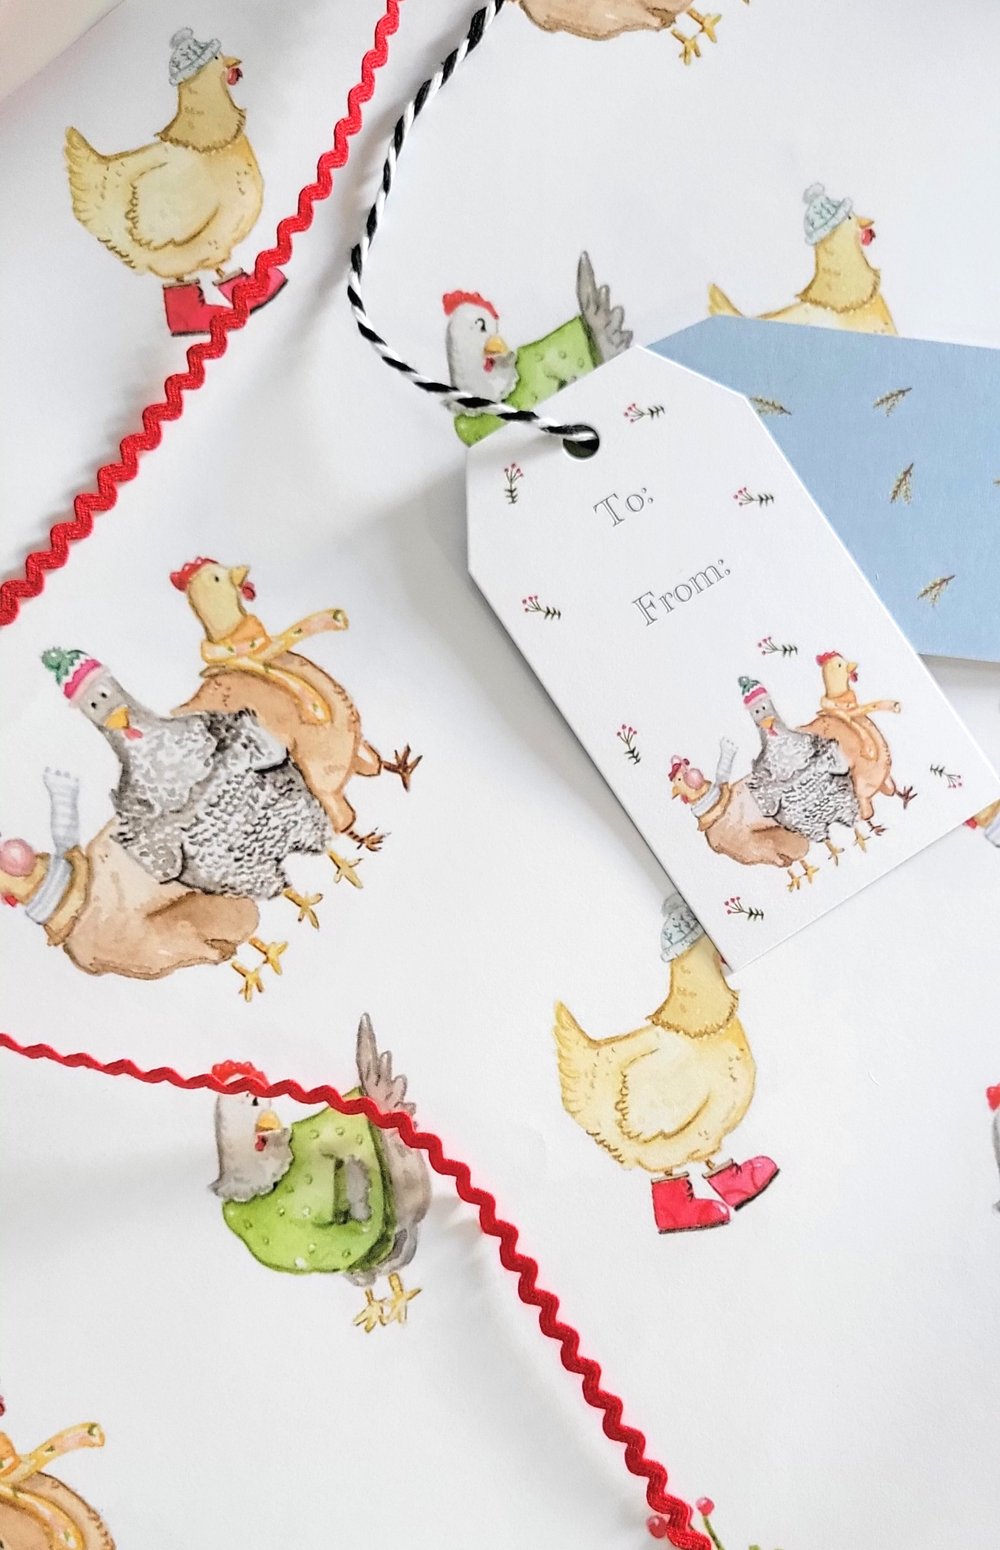 Merry Christmas Wrapping Paper - Green – The Chicks